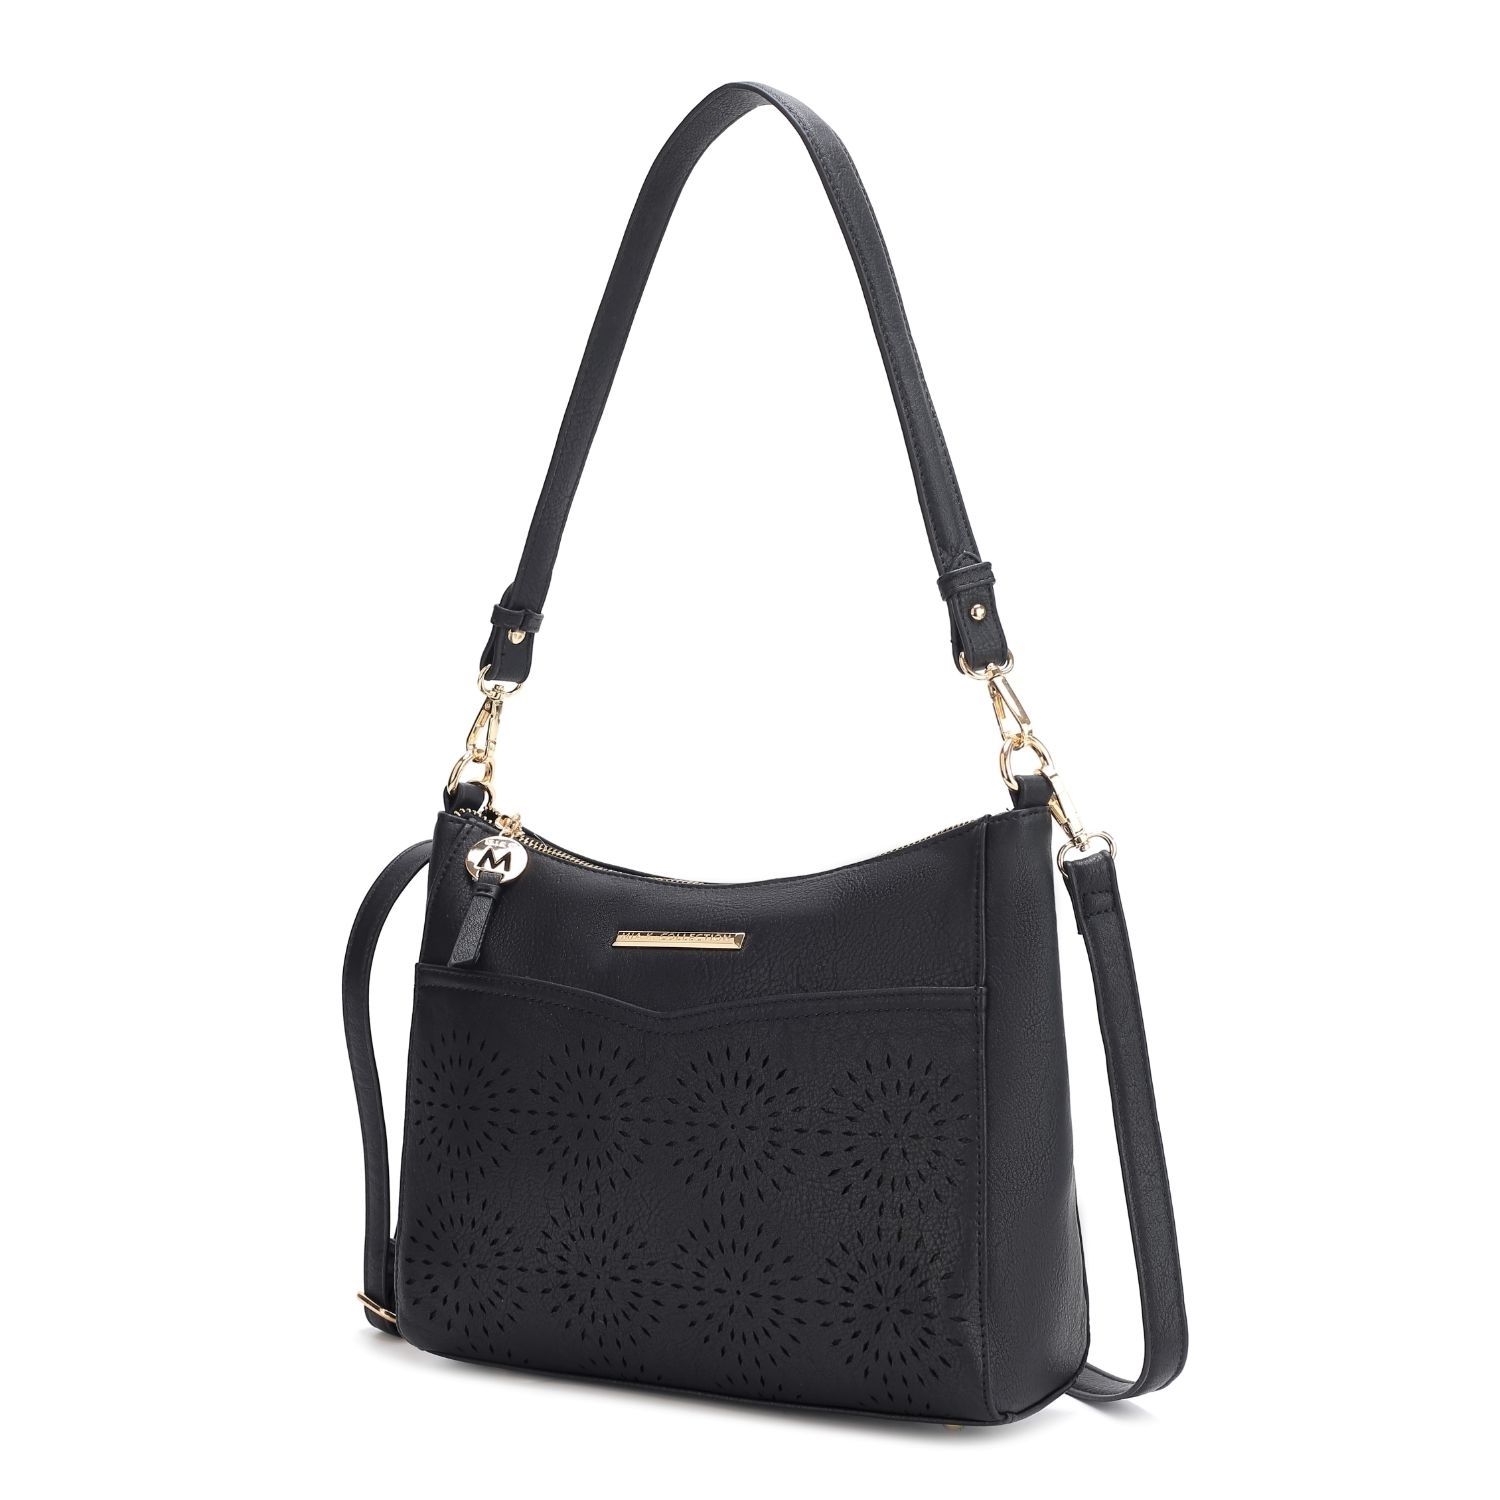 MKF Collection Alanis Laser Cut Vegan Leather Women's Shoulder Bag By Mia K - Charcoal